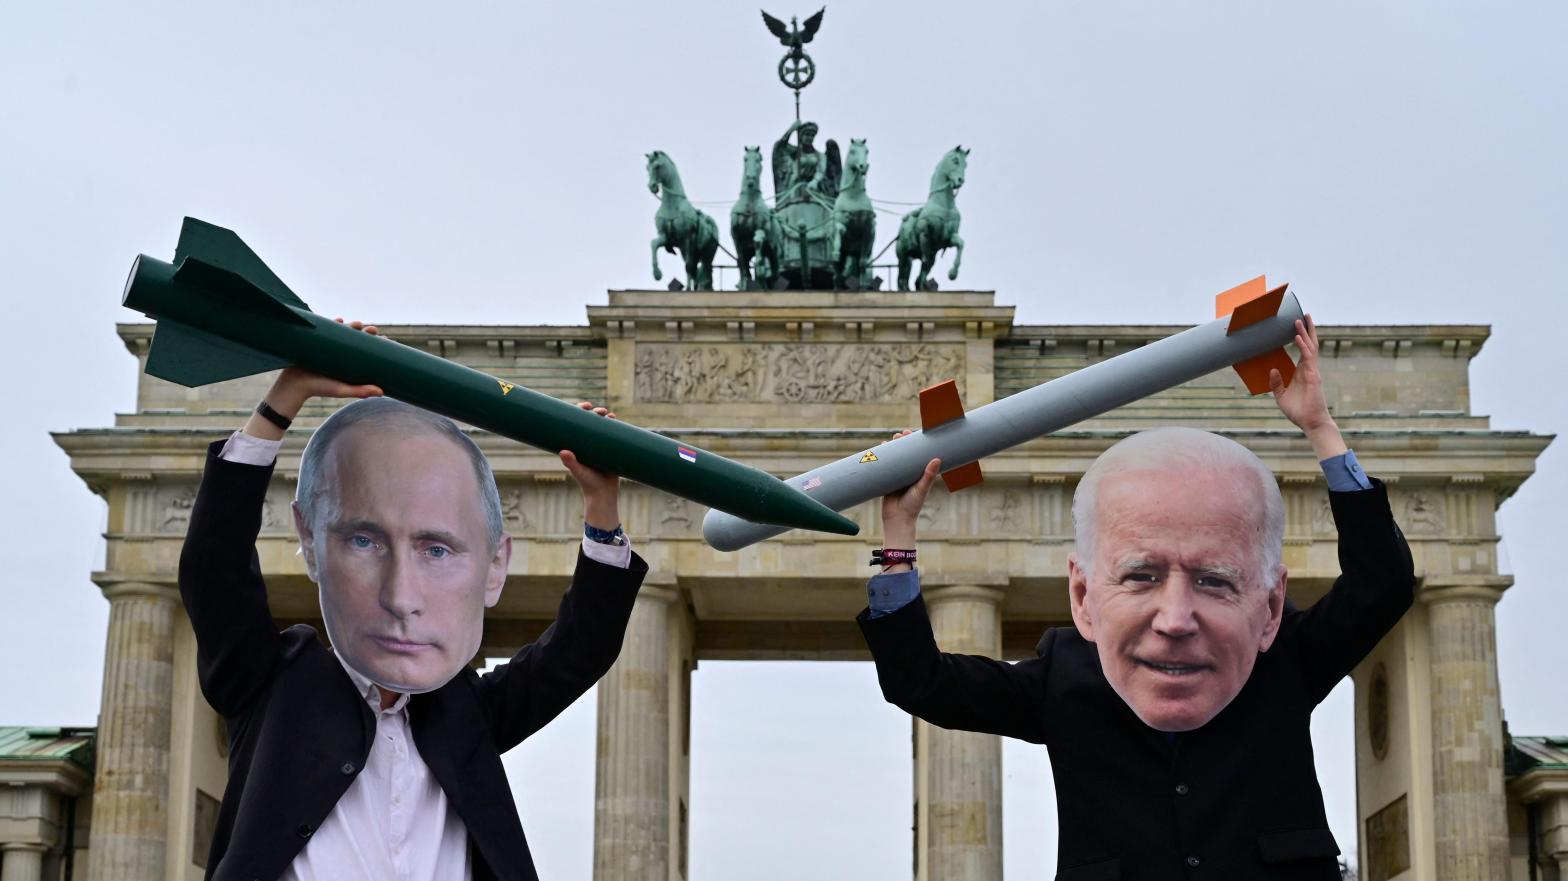 Peace activists wearing masks of Russian President Vladimir Putin (L) and newly elected US President Joe Biden pose with mock nuclear missiles in front of Berlin's landmark the Brandenburg Gate on January 29, 2021 in an action to call for more progress in nuclear disarmament. (Photo: John MacDougal, Getty Images)